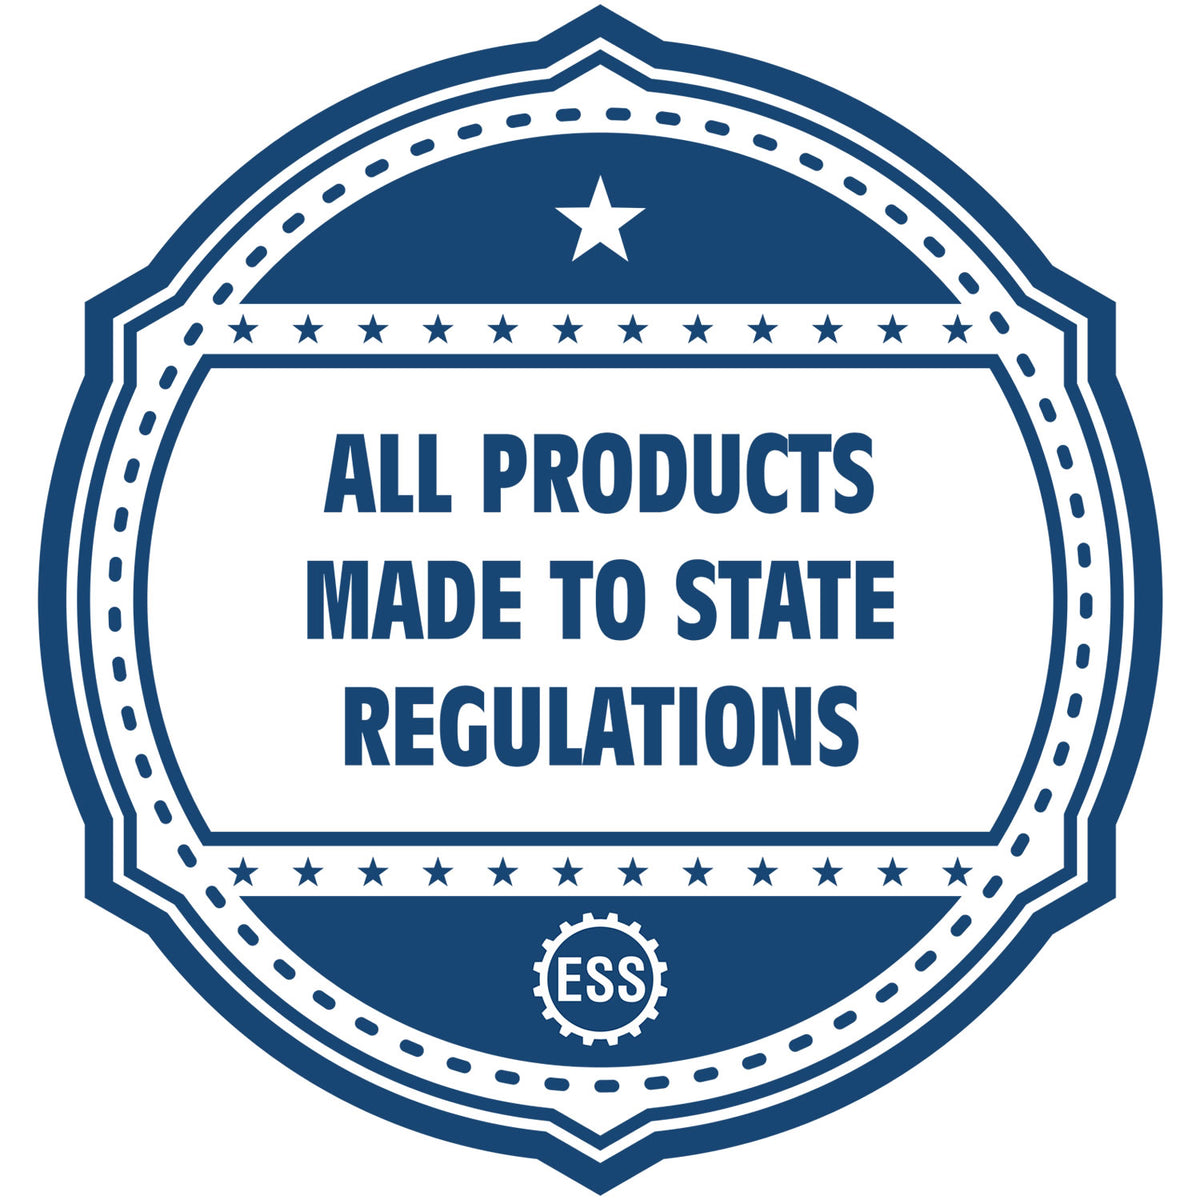 An icon or badge element for the State of North Dakota Architectural Seal Embosser showing that this product is made in compliance with state regulations.